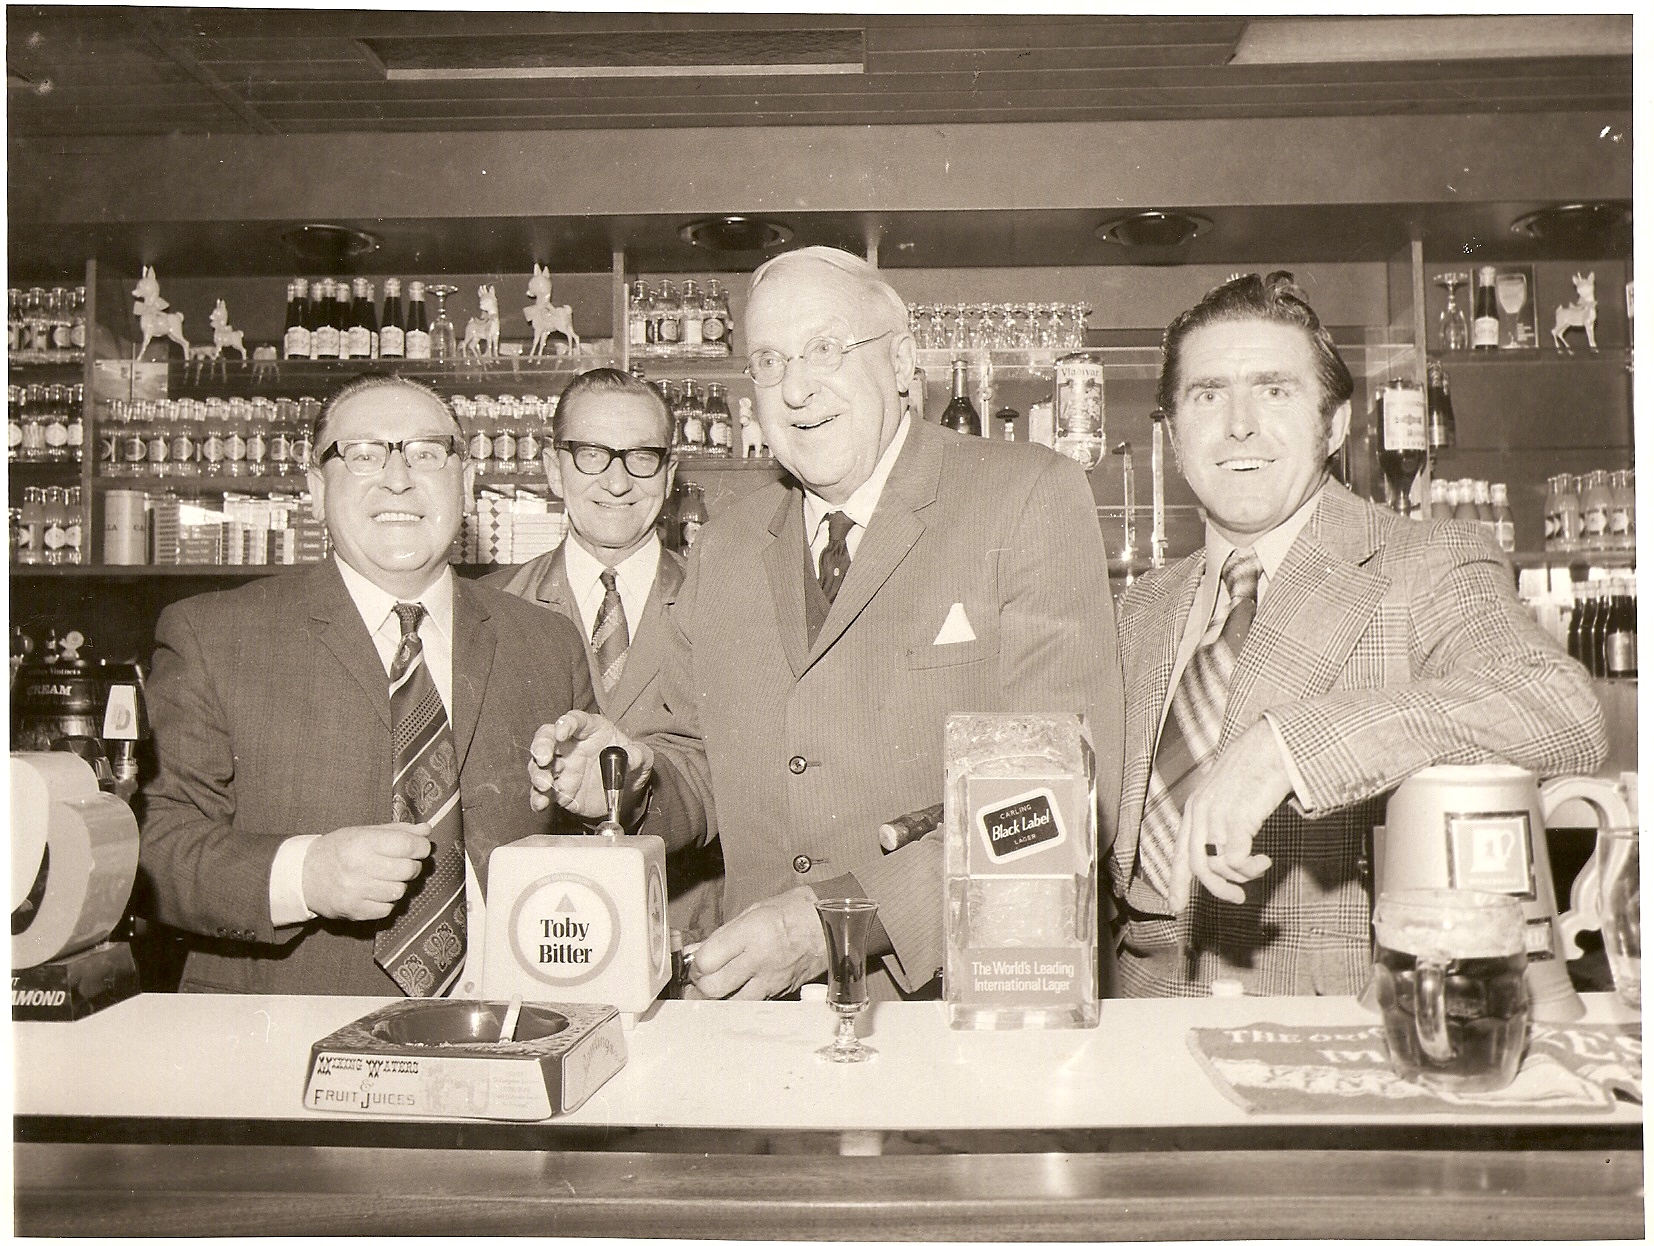 4 men standing behind a bar. One is pulling a pint.